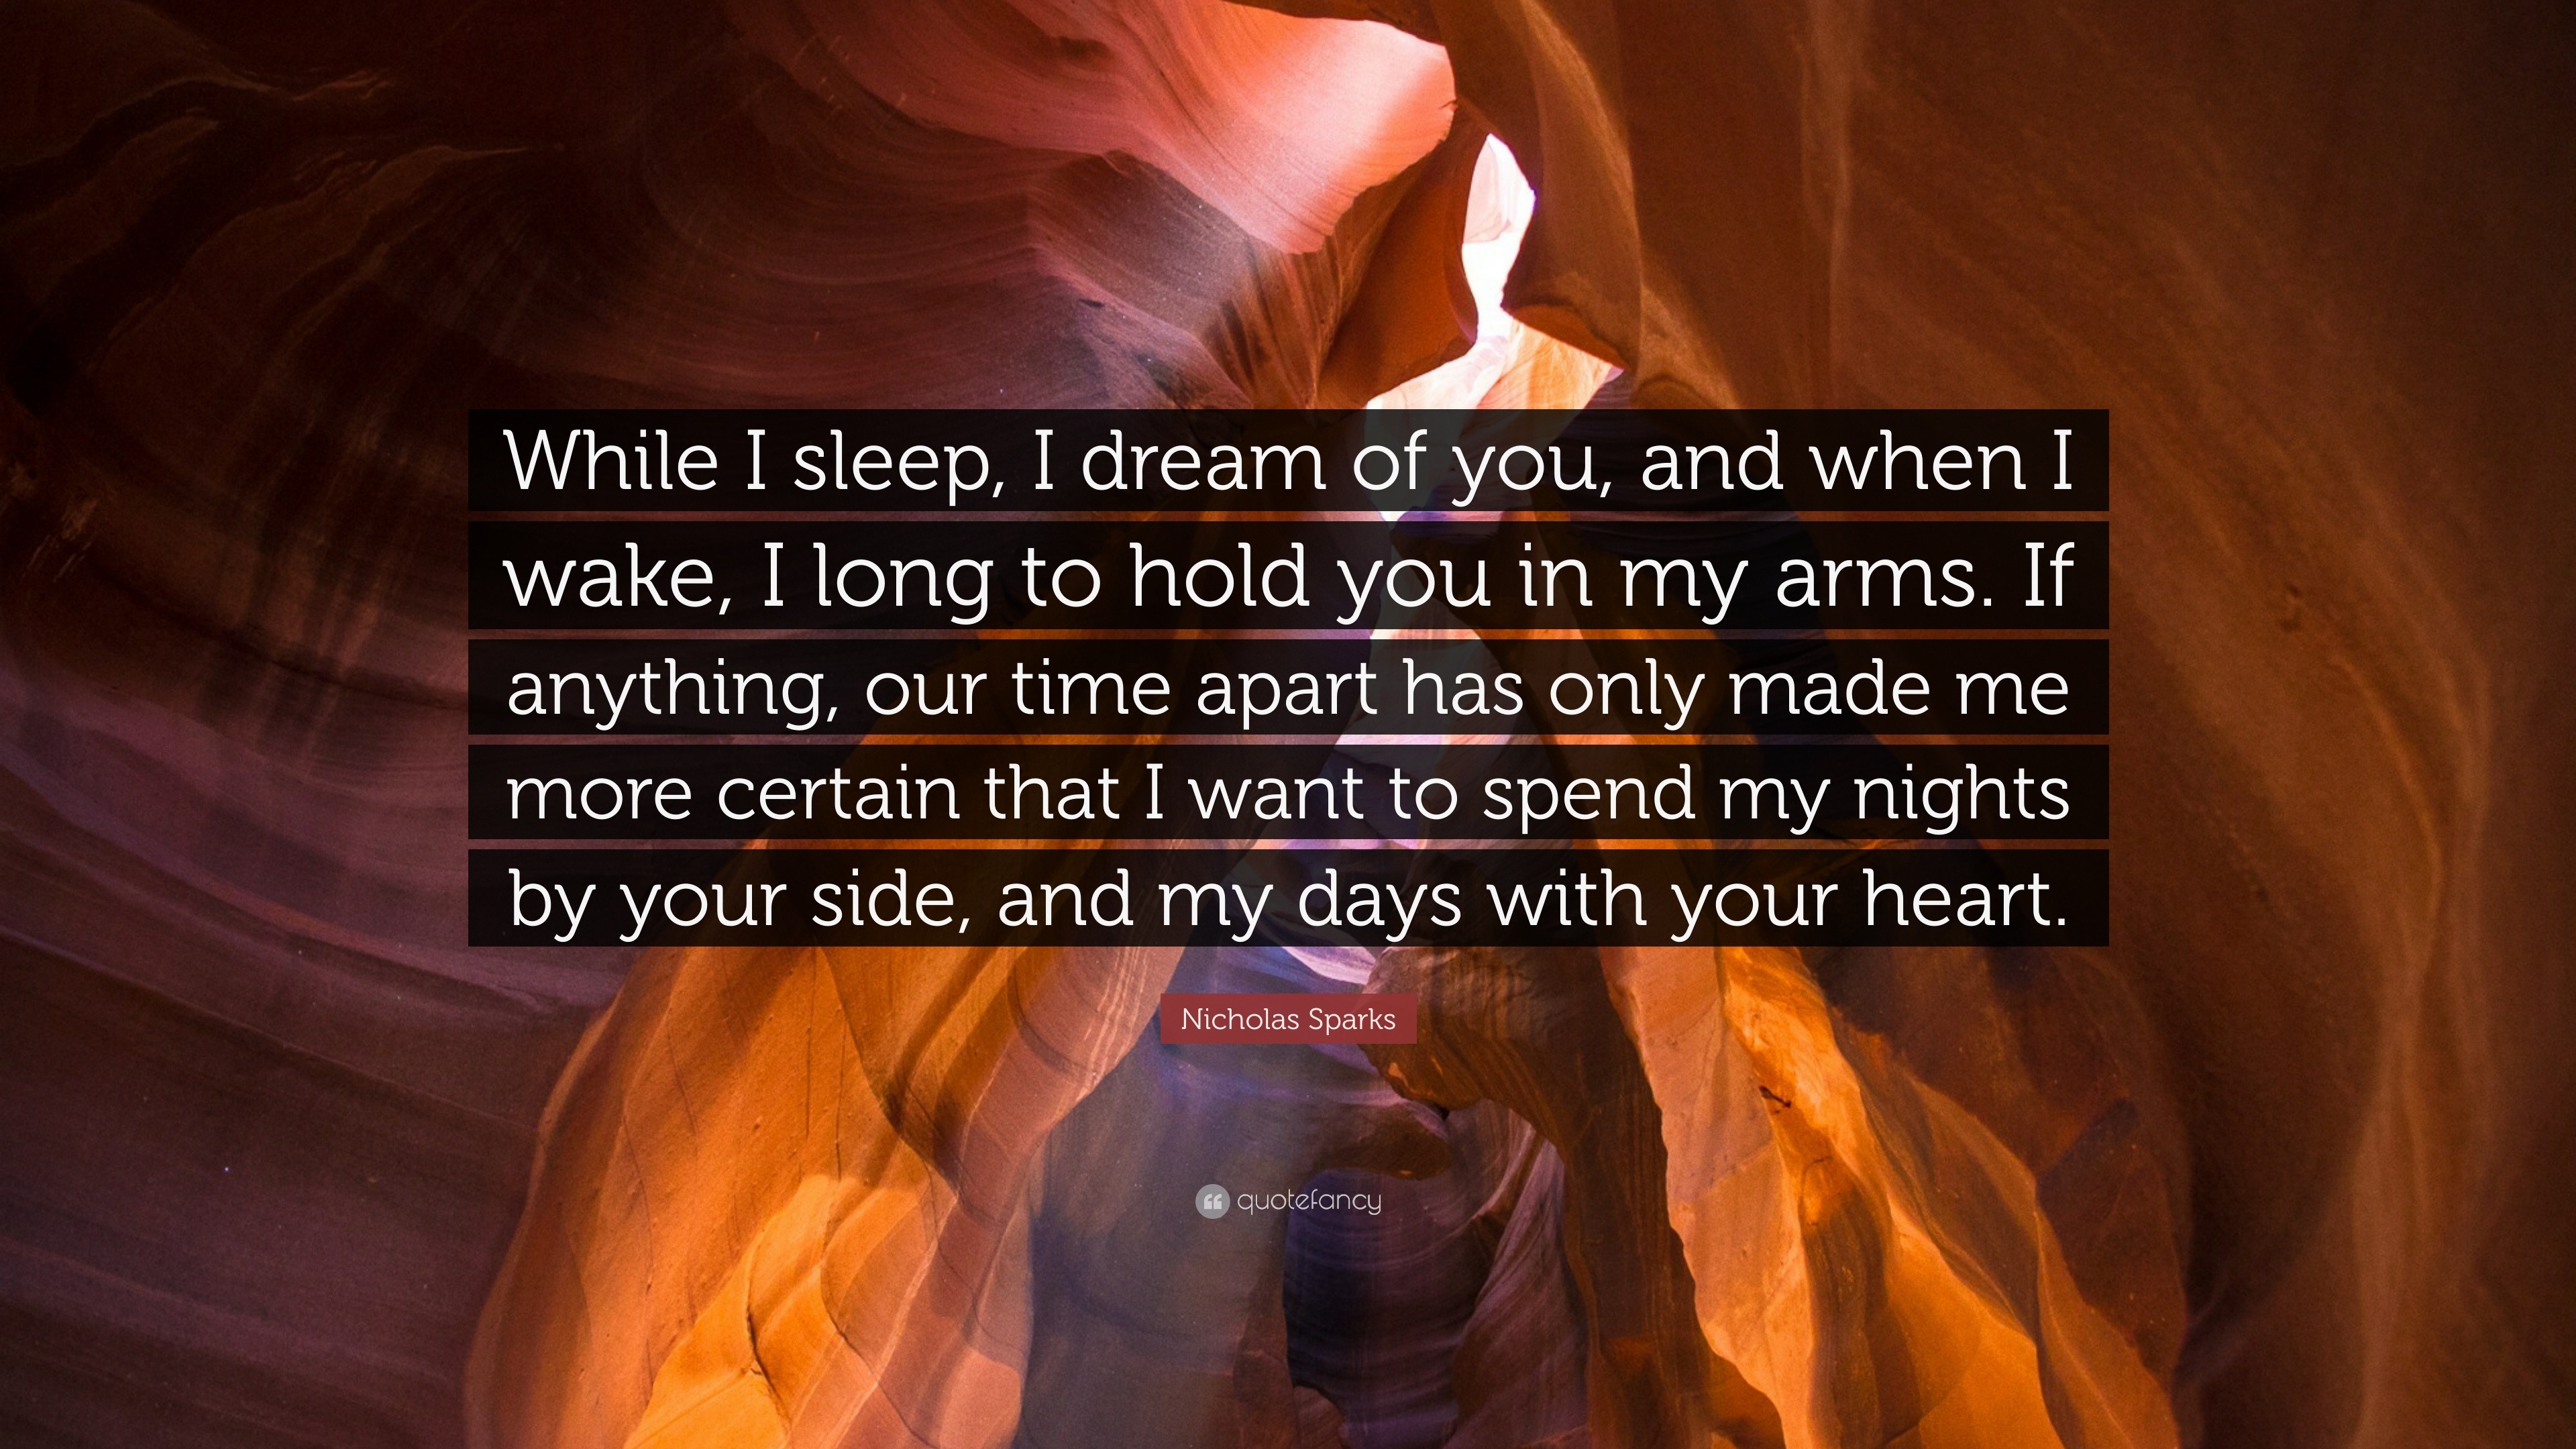 Nicholas Sparks Quote: “While I sleep, I dream of you, and when I